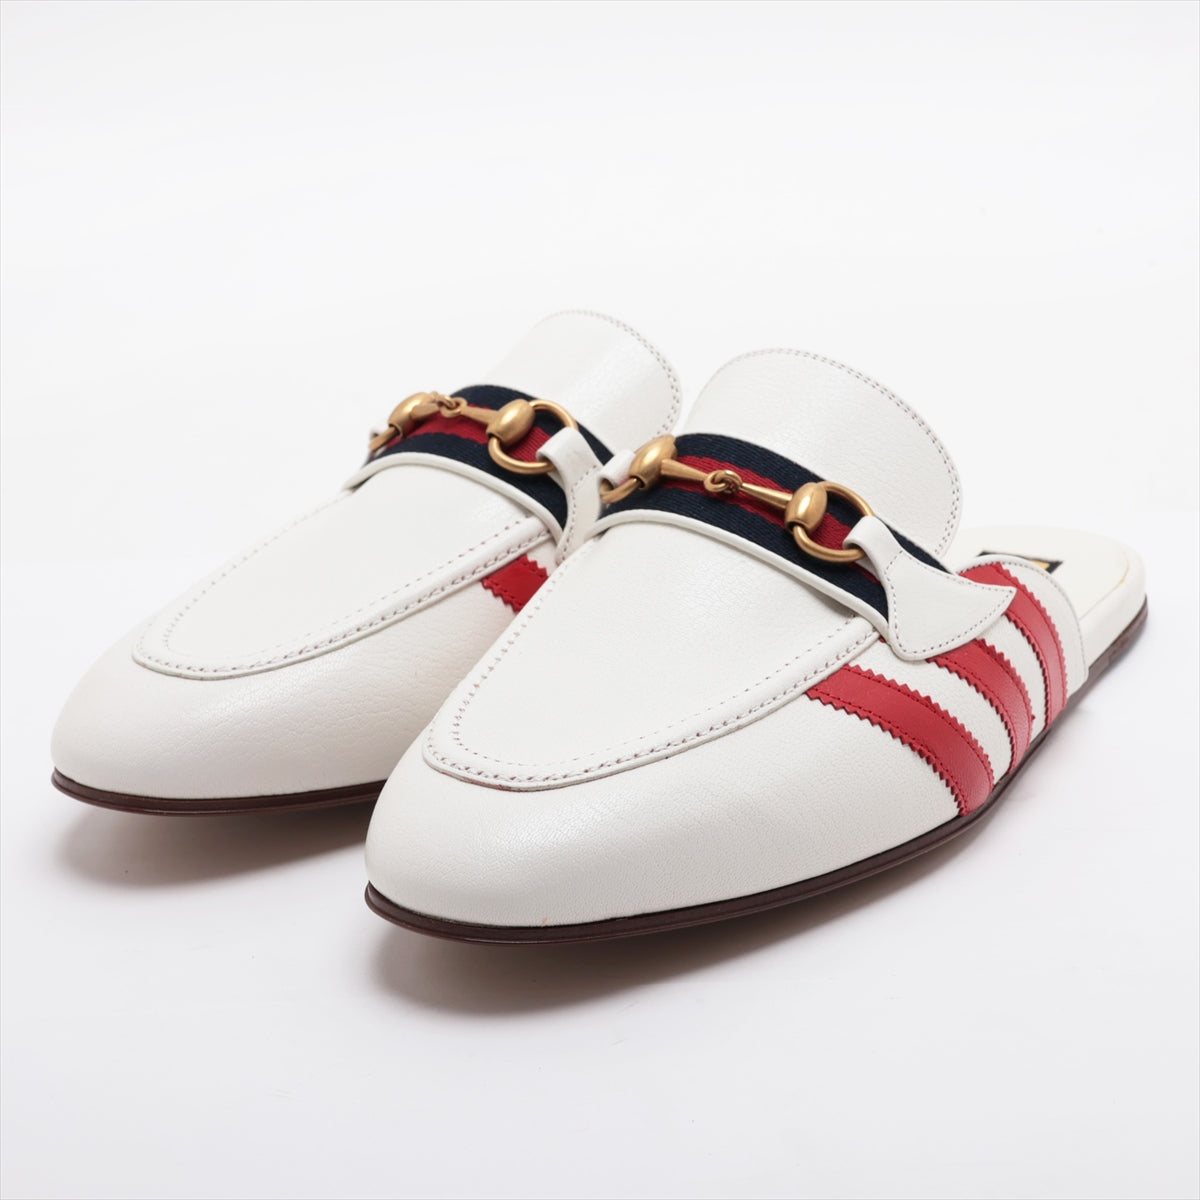 Gucci x adidas Horsebit Leather Mule 10 Men's Red x white 721481 Slipper Three Stripes There is a storage bag